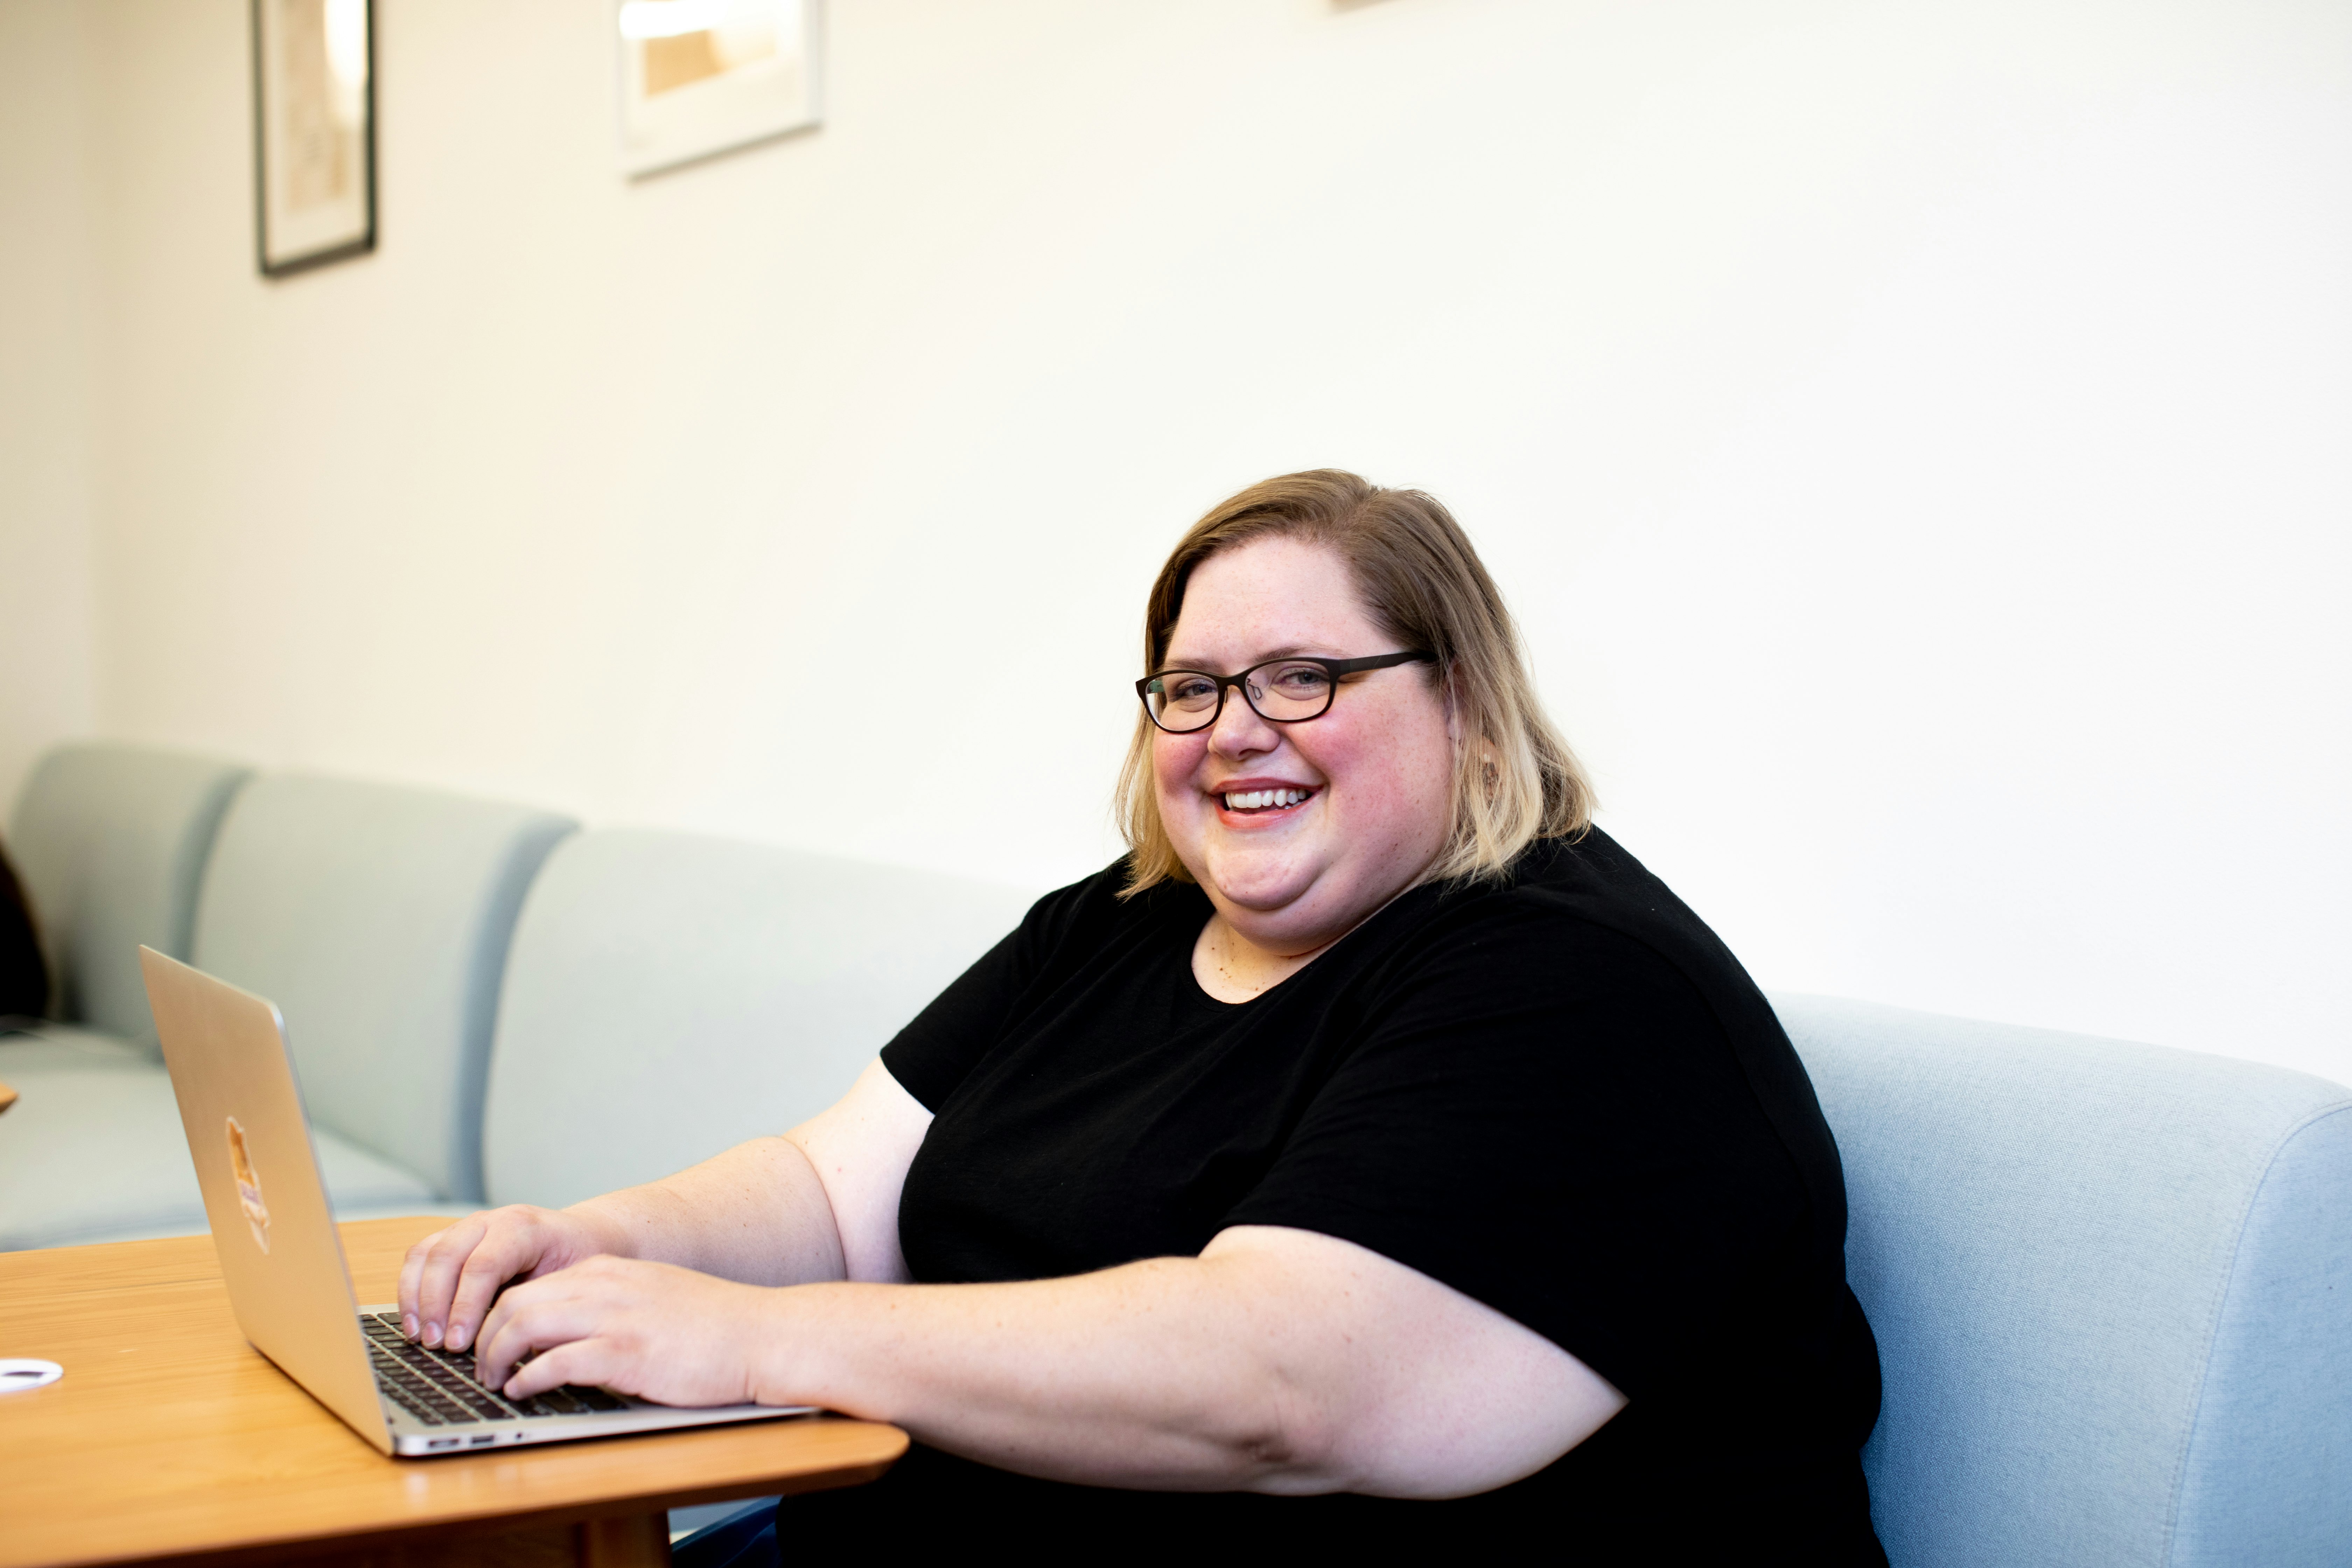 Plus size woman on computer in bright, modern, open office